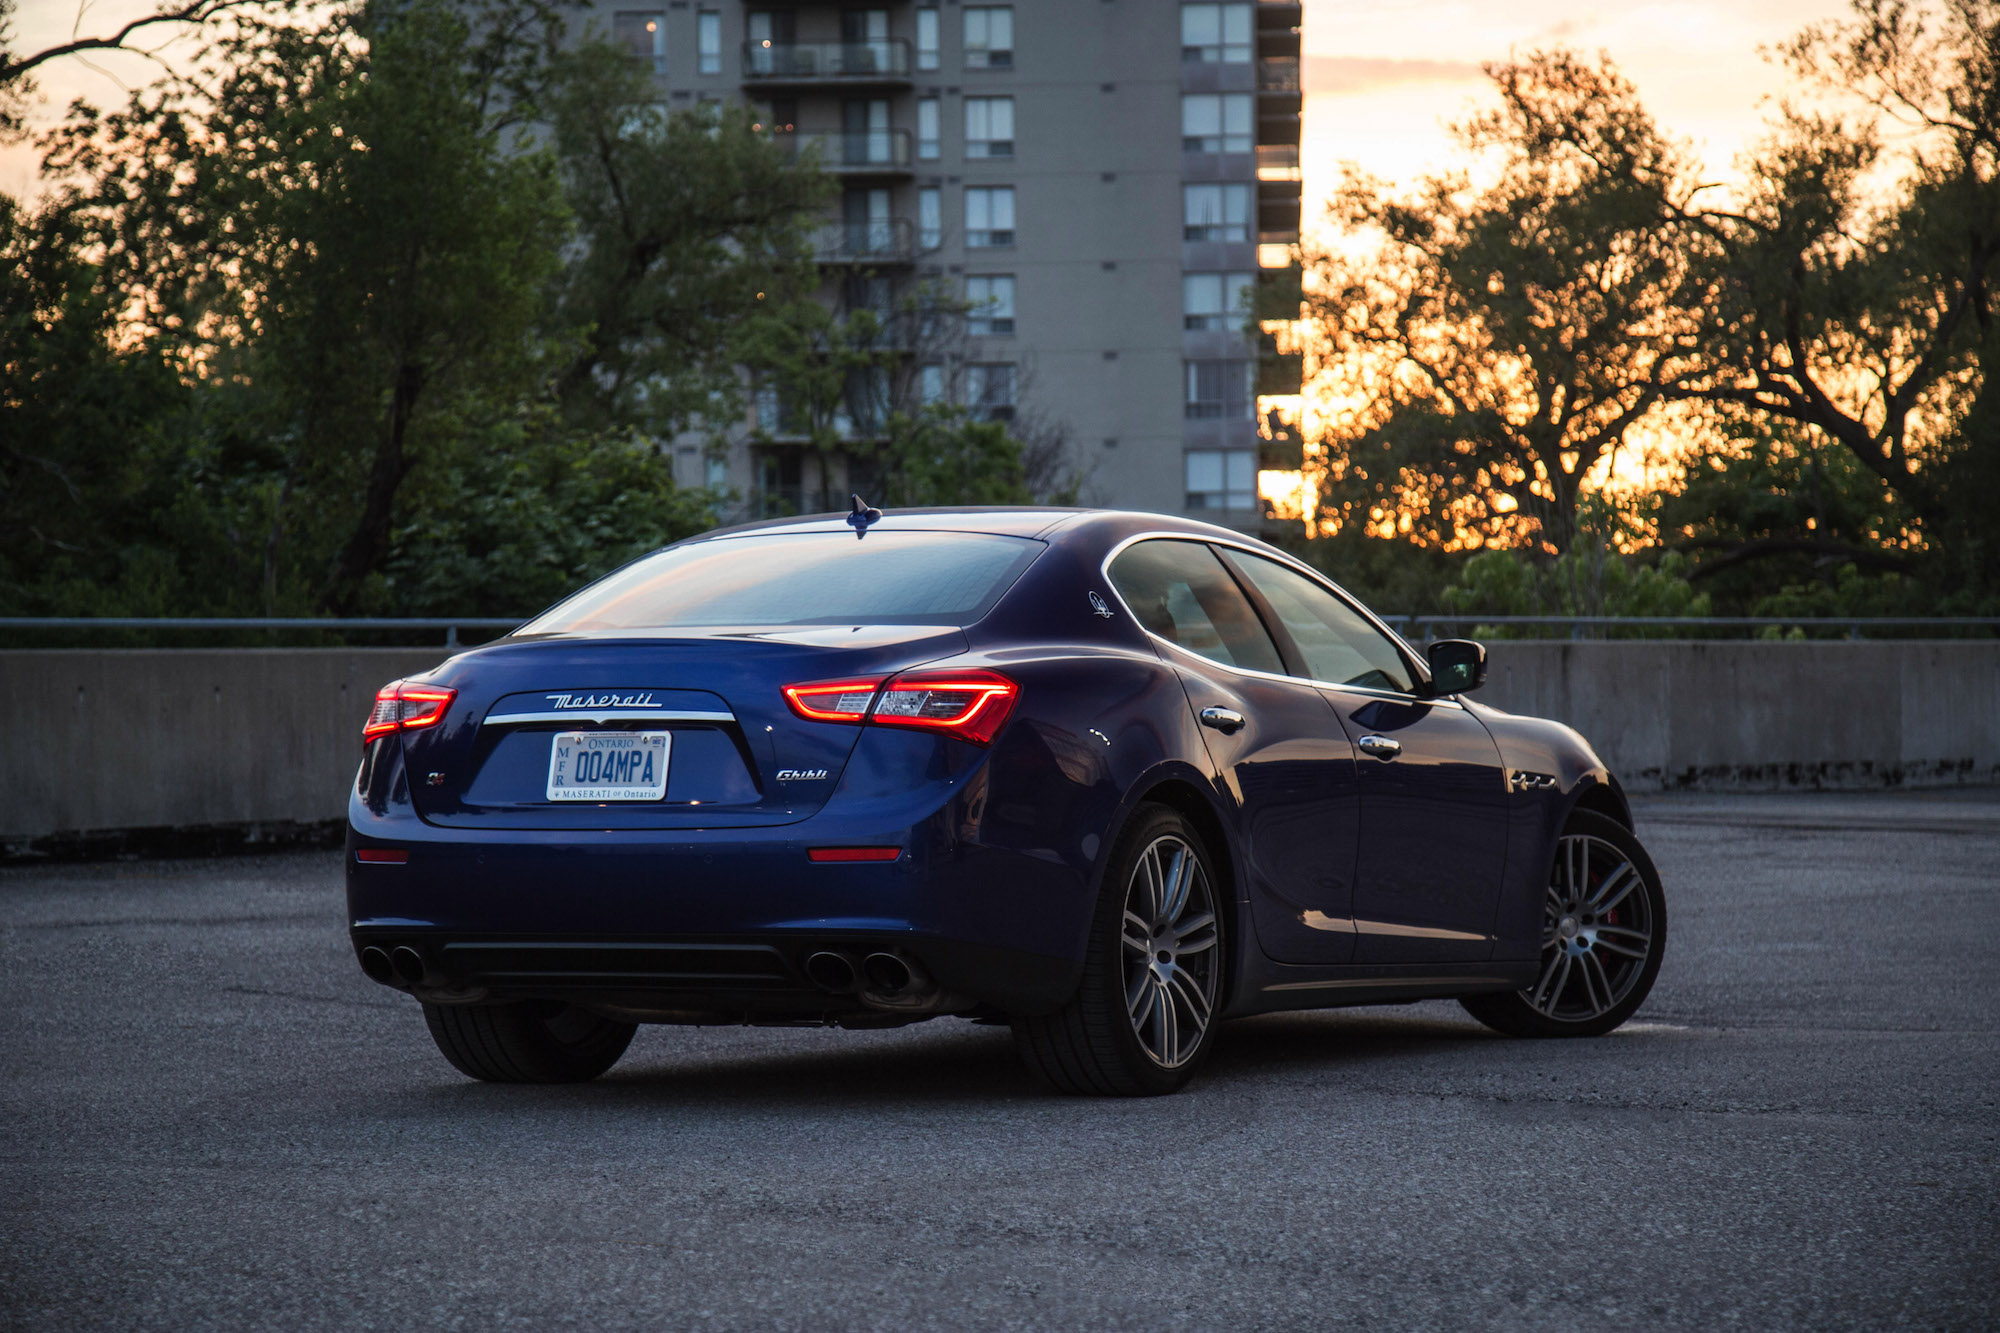 Review: 2016 Maserati Ghibli S Q4 | Canadian Auto Review